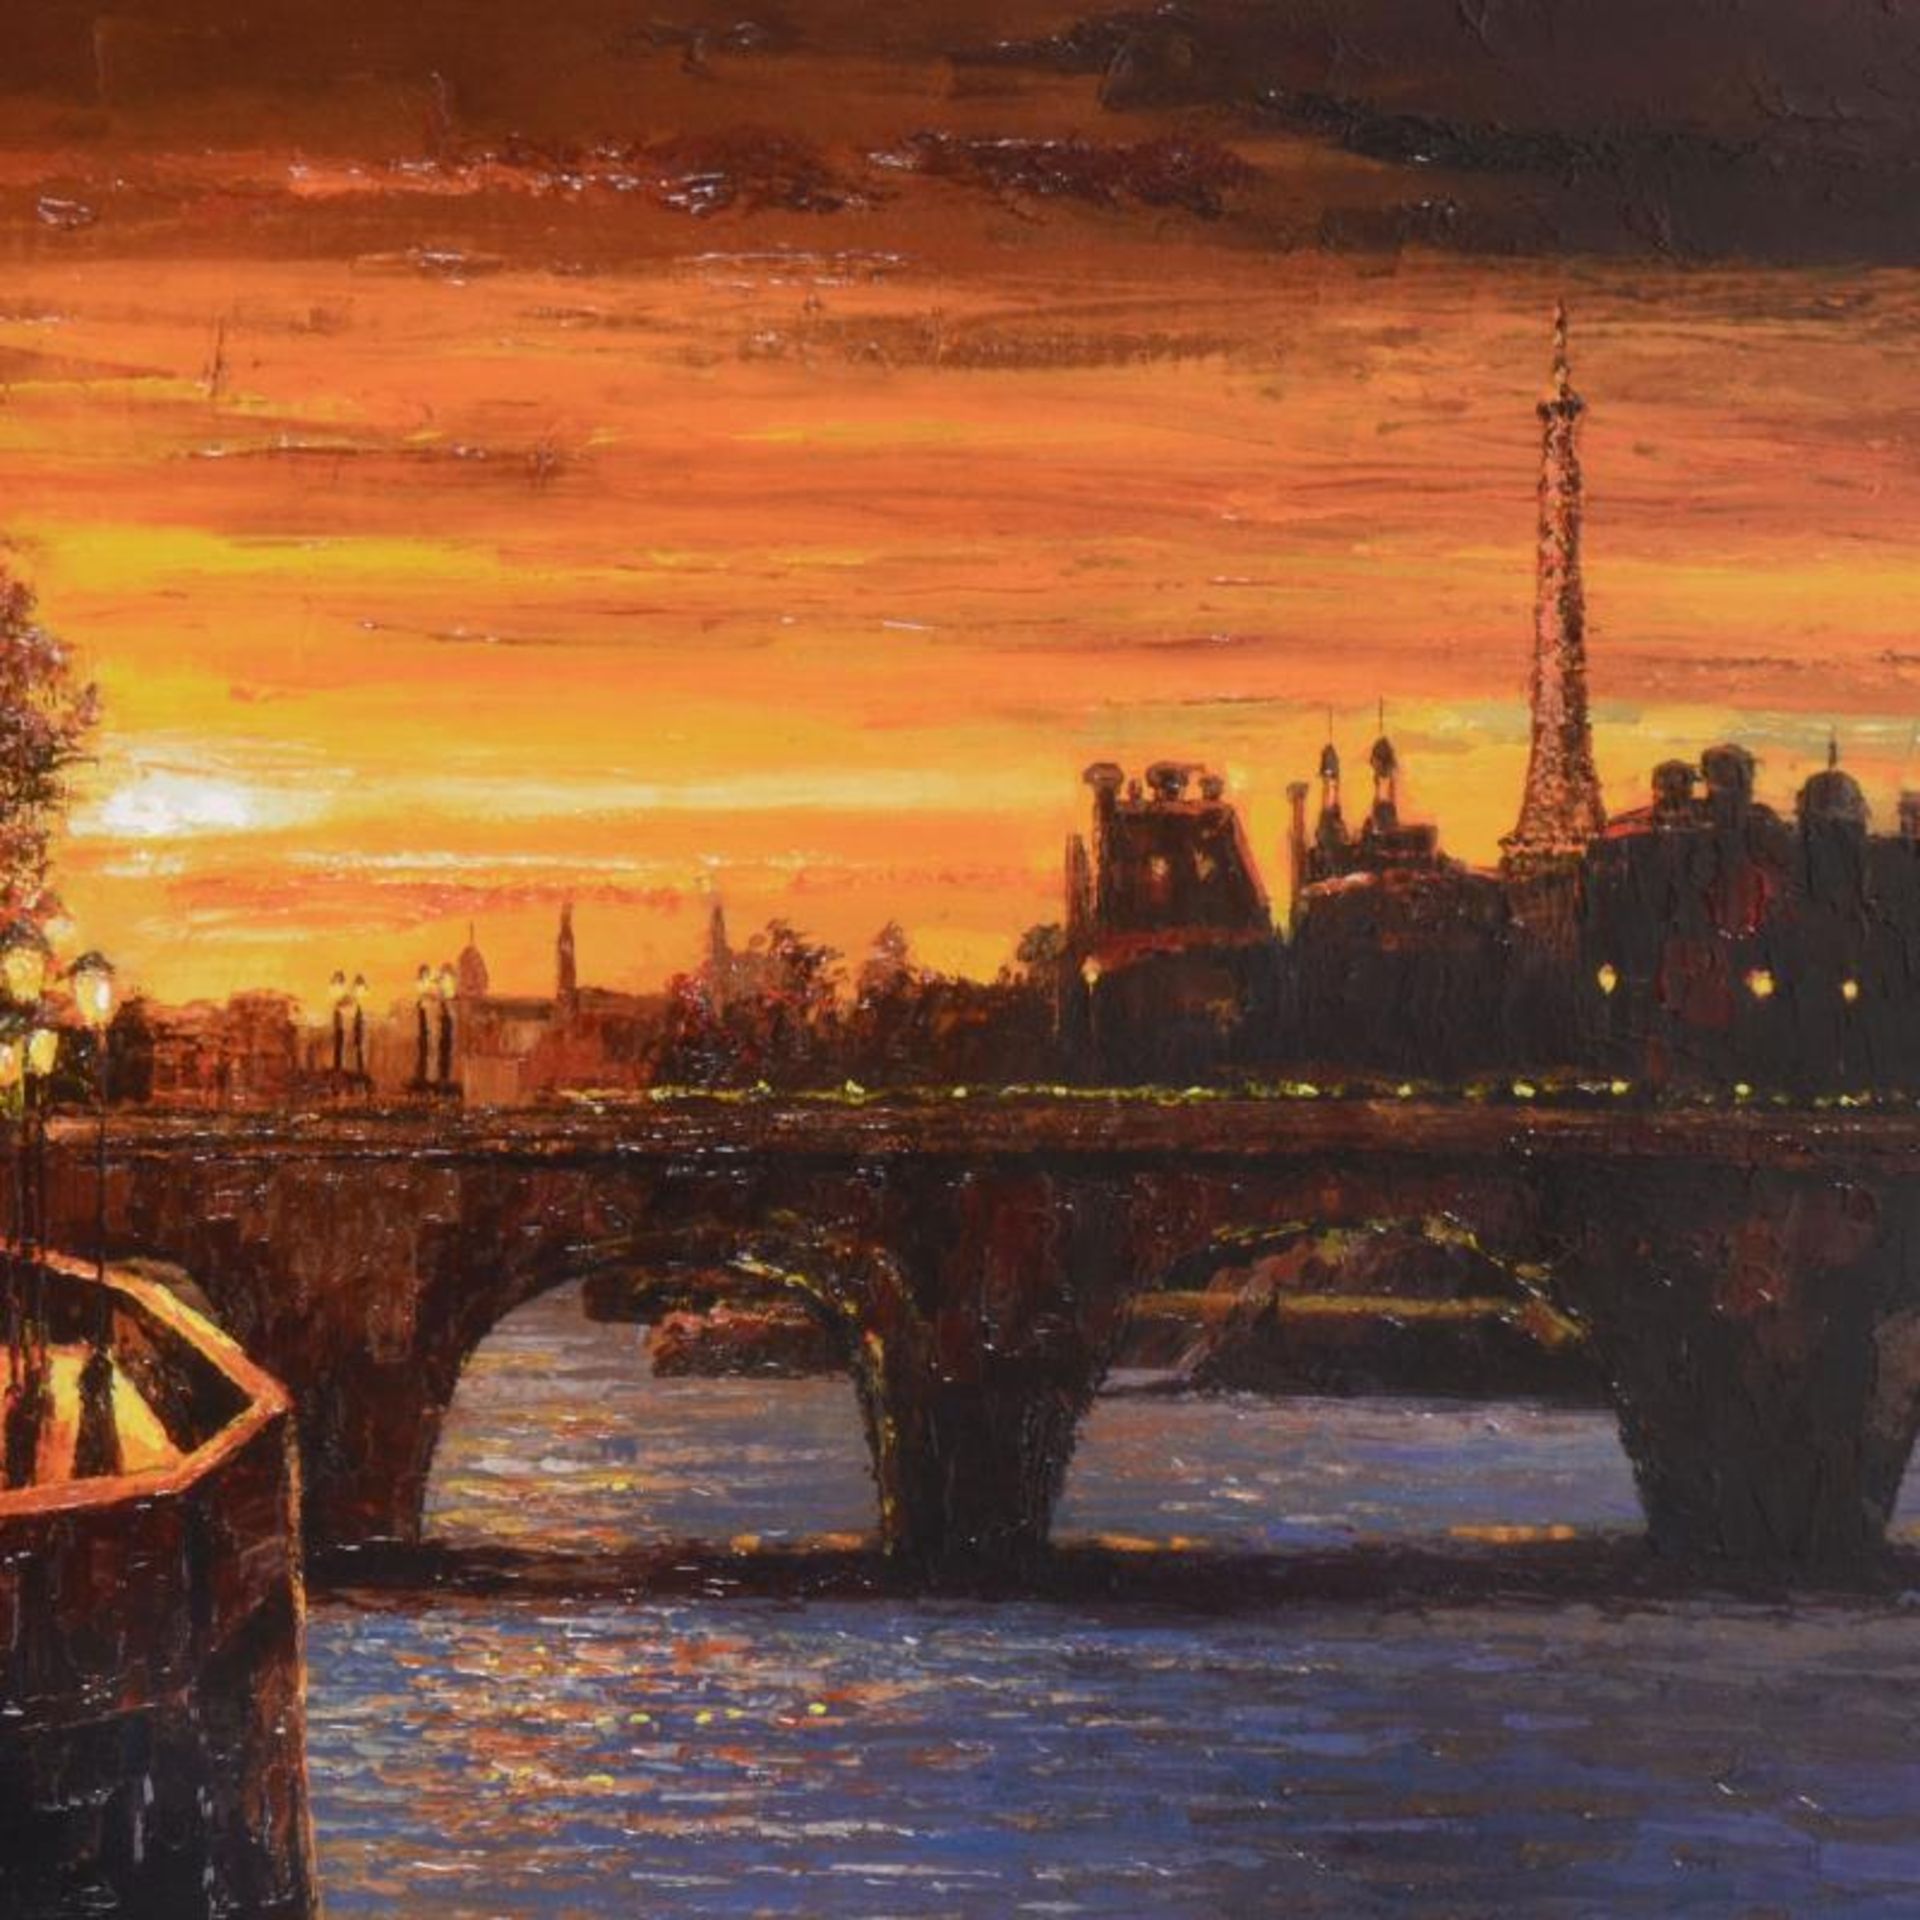 Howard Behrens (1933-2014), "Twilight On The Seine II" Limited Edition on Canvas - Image 2 of 2